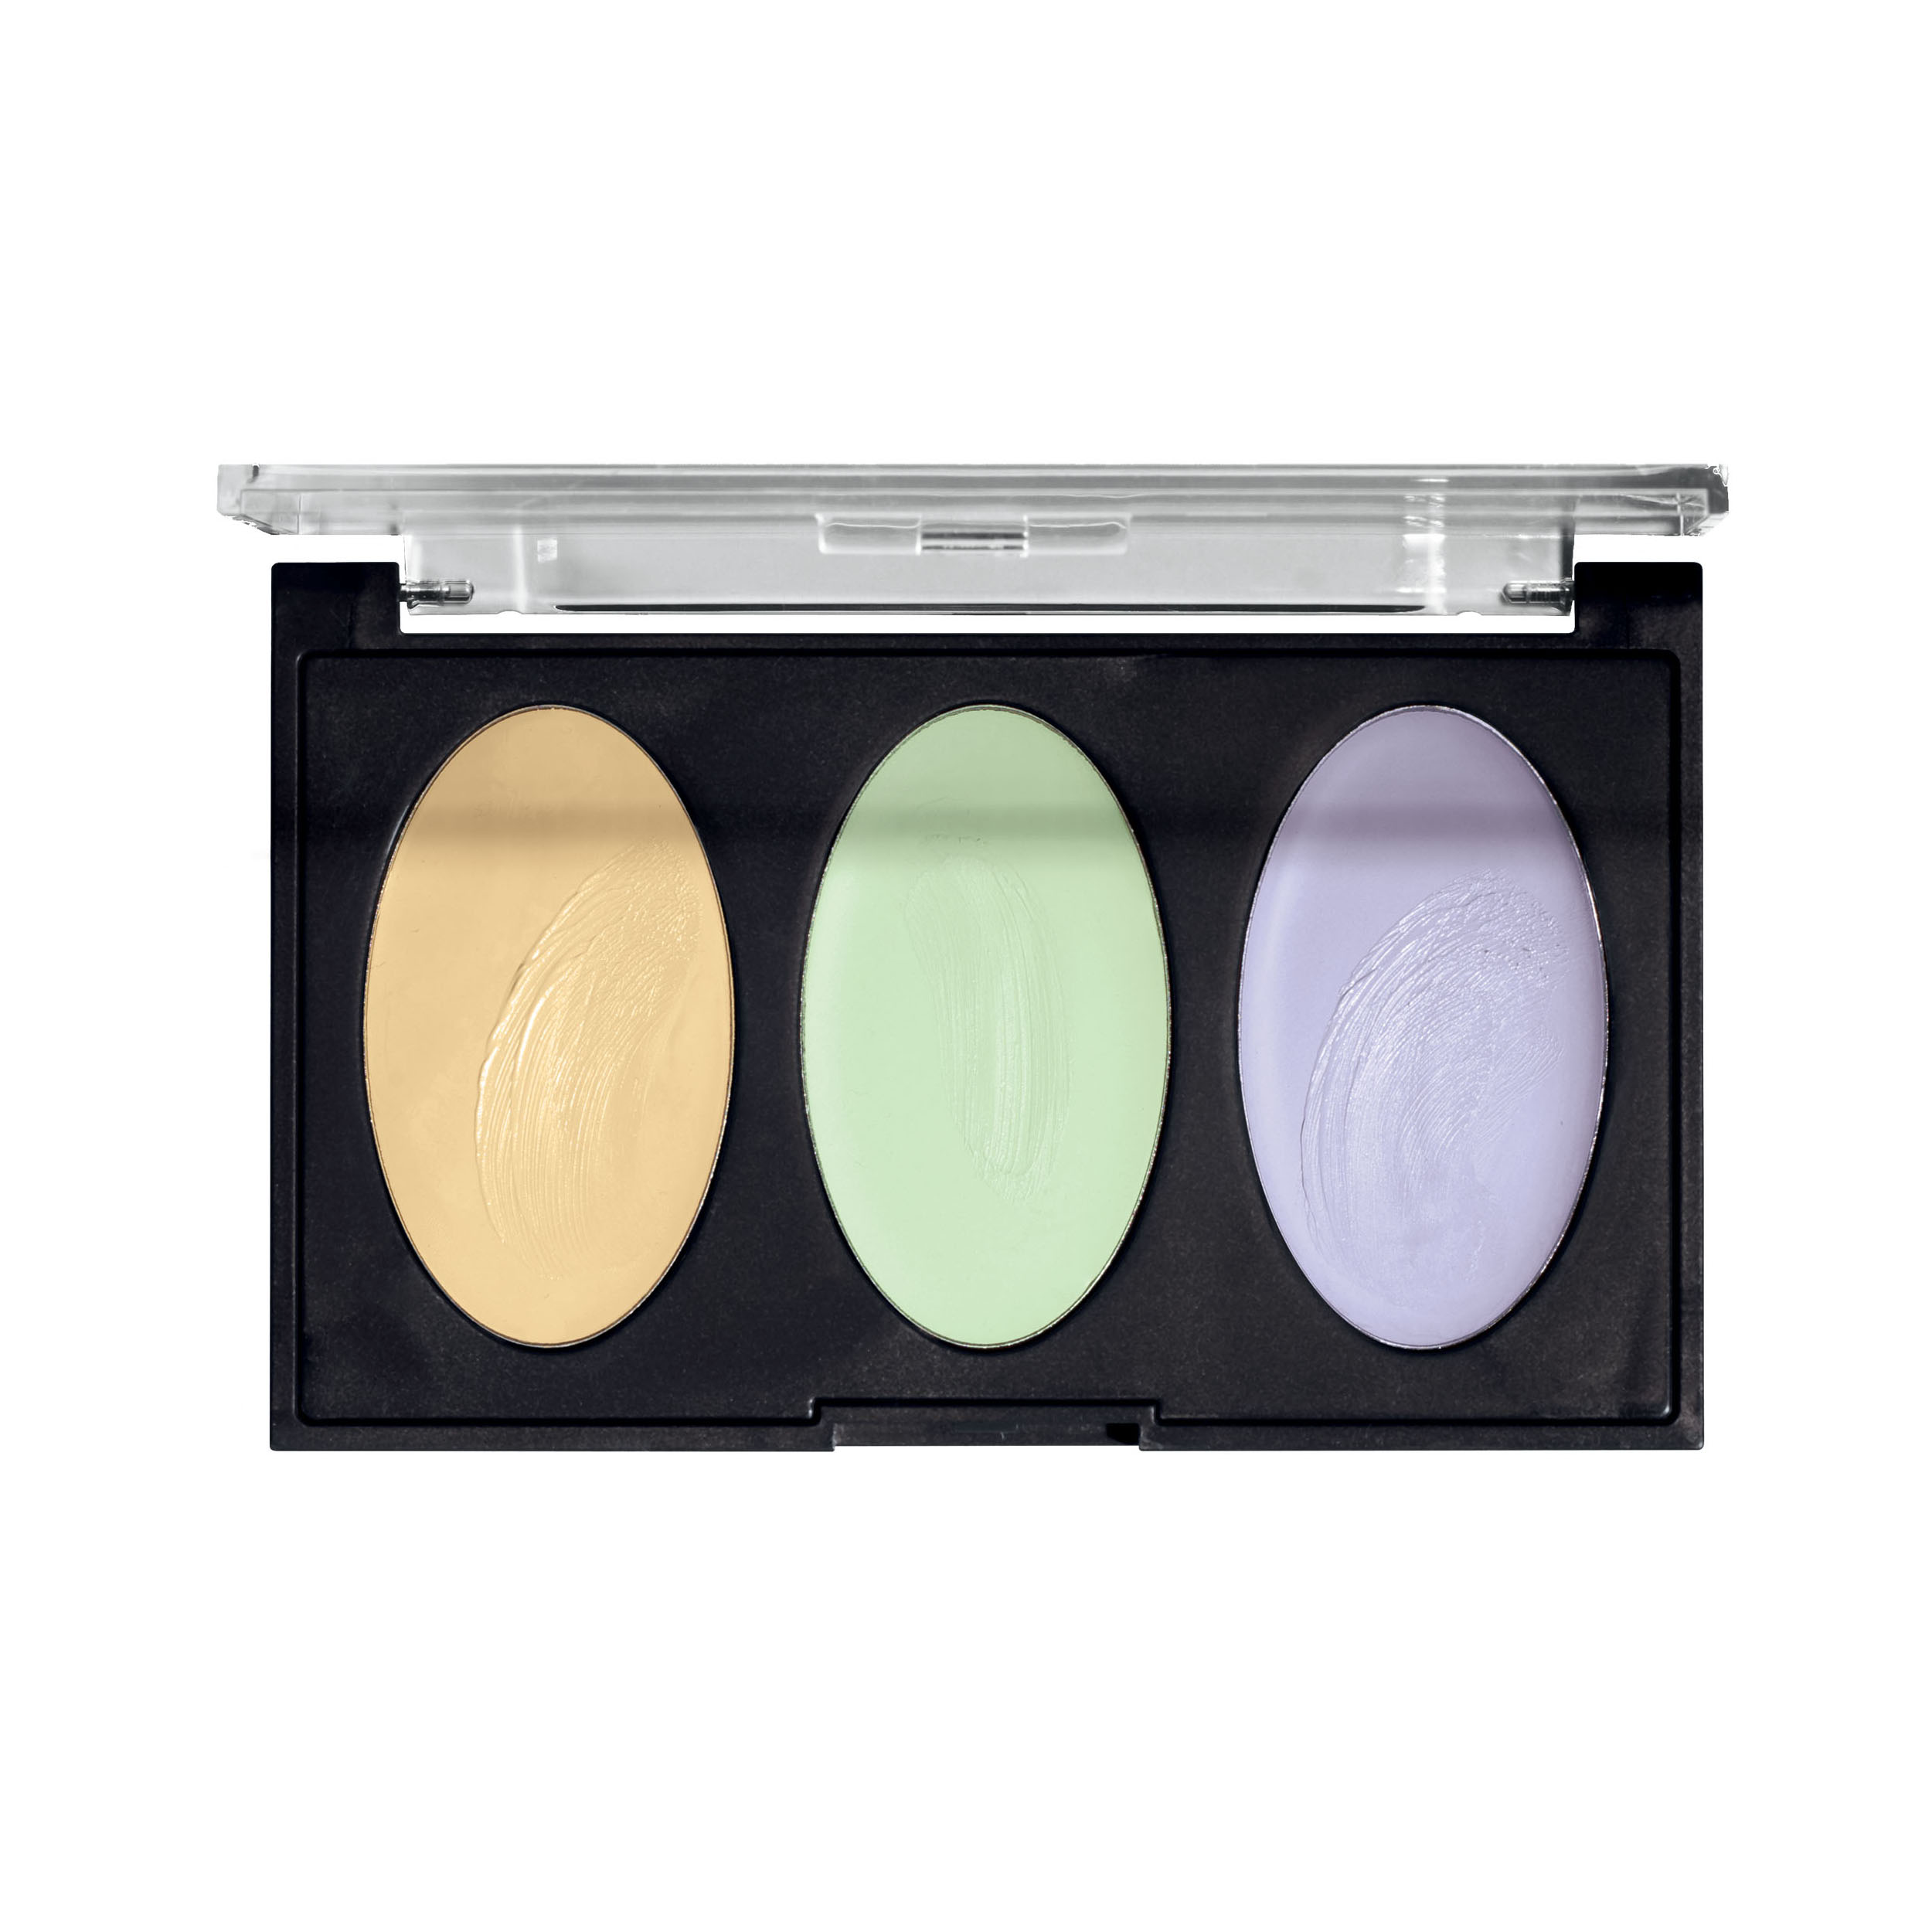 COVERGIRL TruBlend Pre-Touching Color Correcting Palette, 505 Warm - image 2 of 2